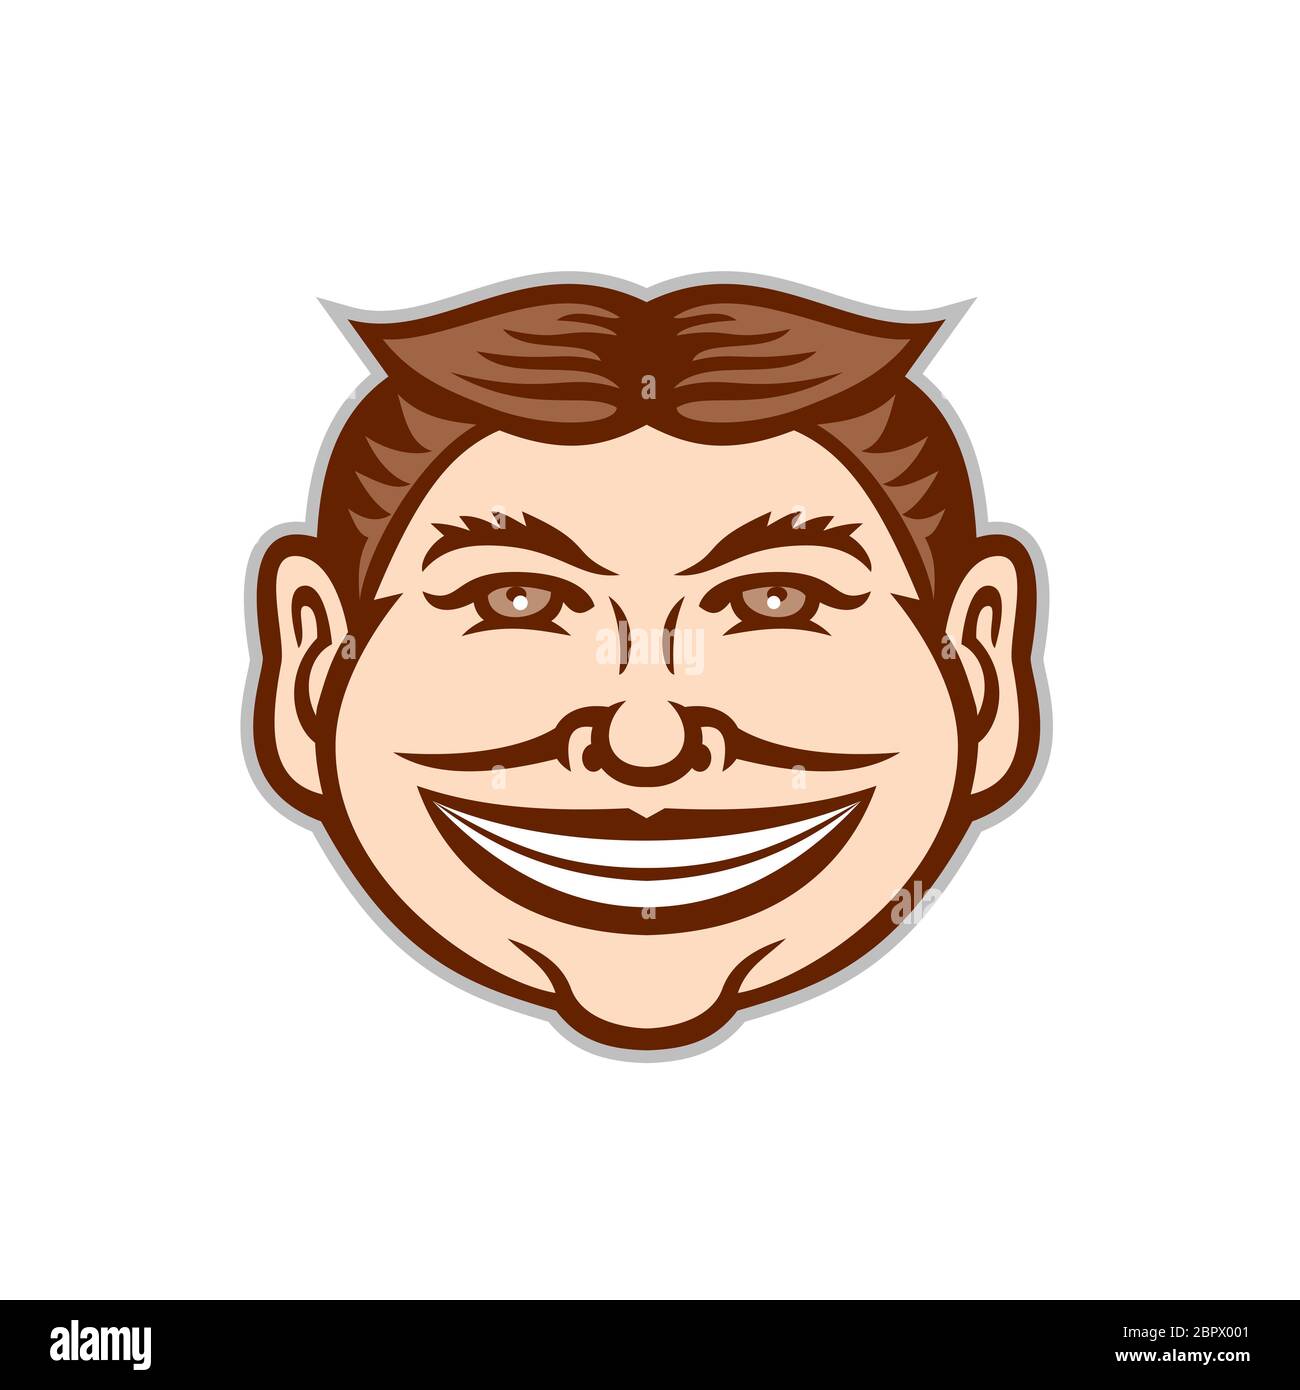 Mascot icon illustration of head of a funny face grinning, leering, smiling slyly beaming mug with hair parted in middle viewed from front on isolated Stock Photo